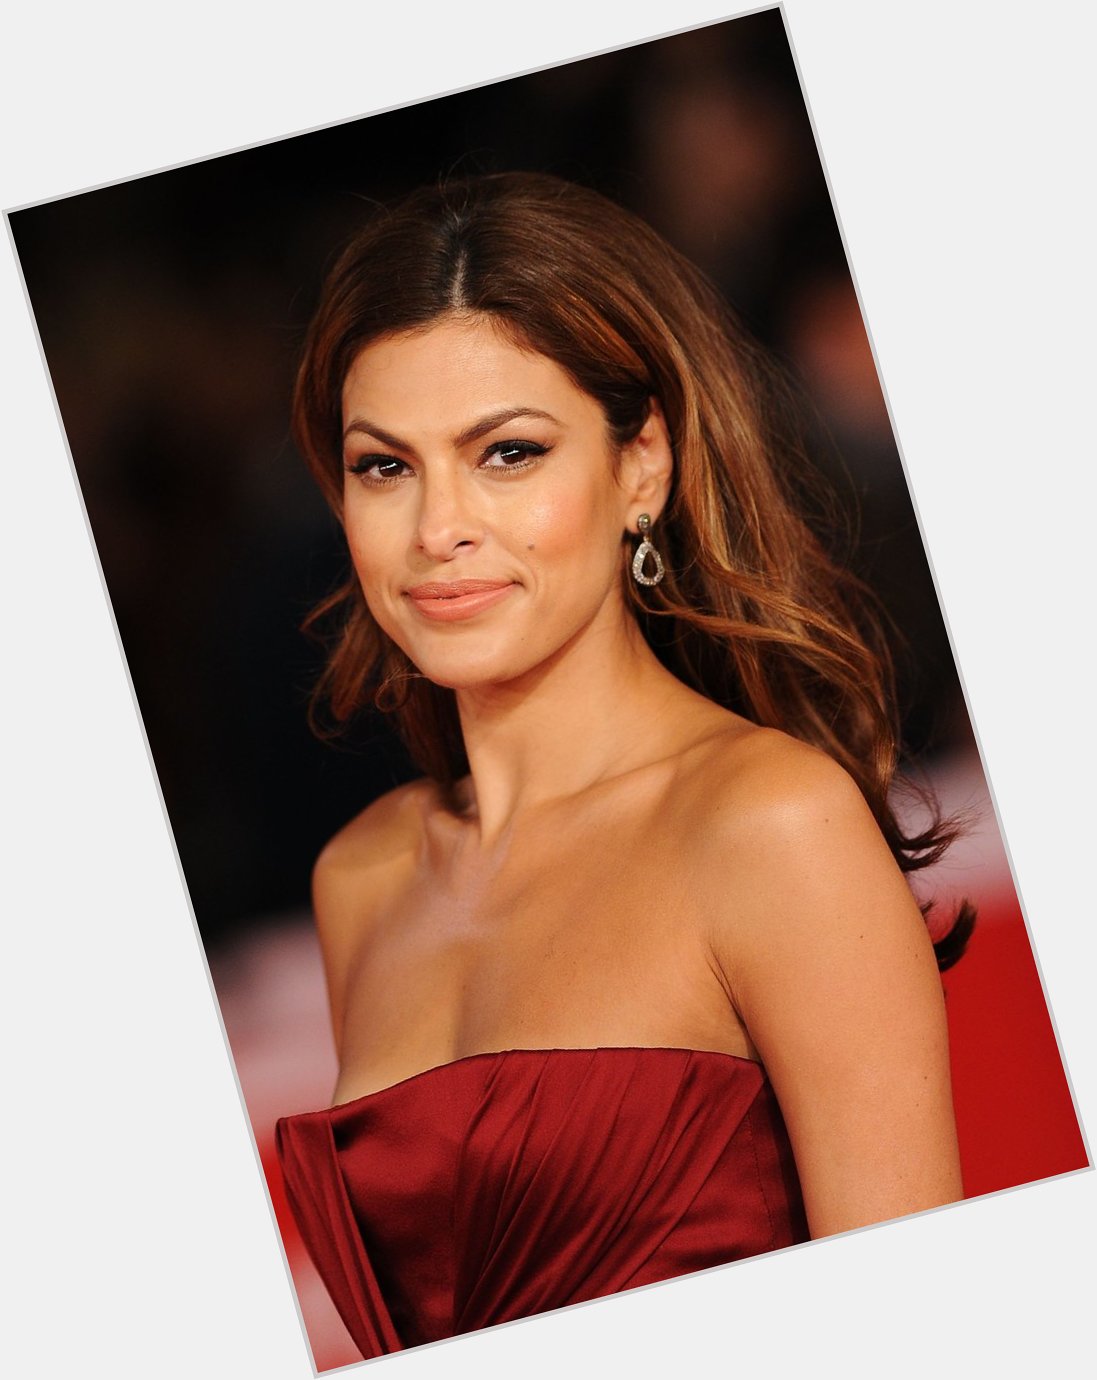 A very Happy 44th Birthday to model/actress Eva Mendes who modeled with our very own 